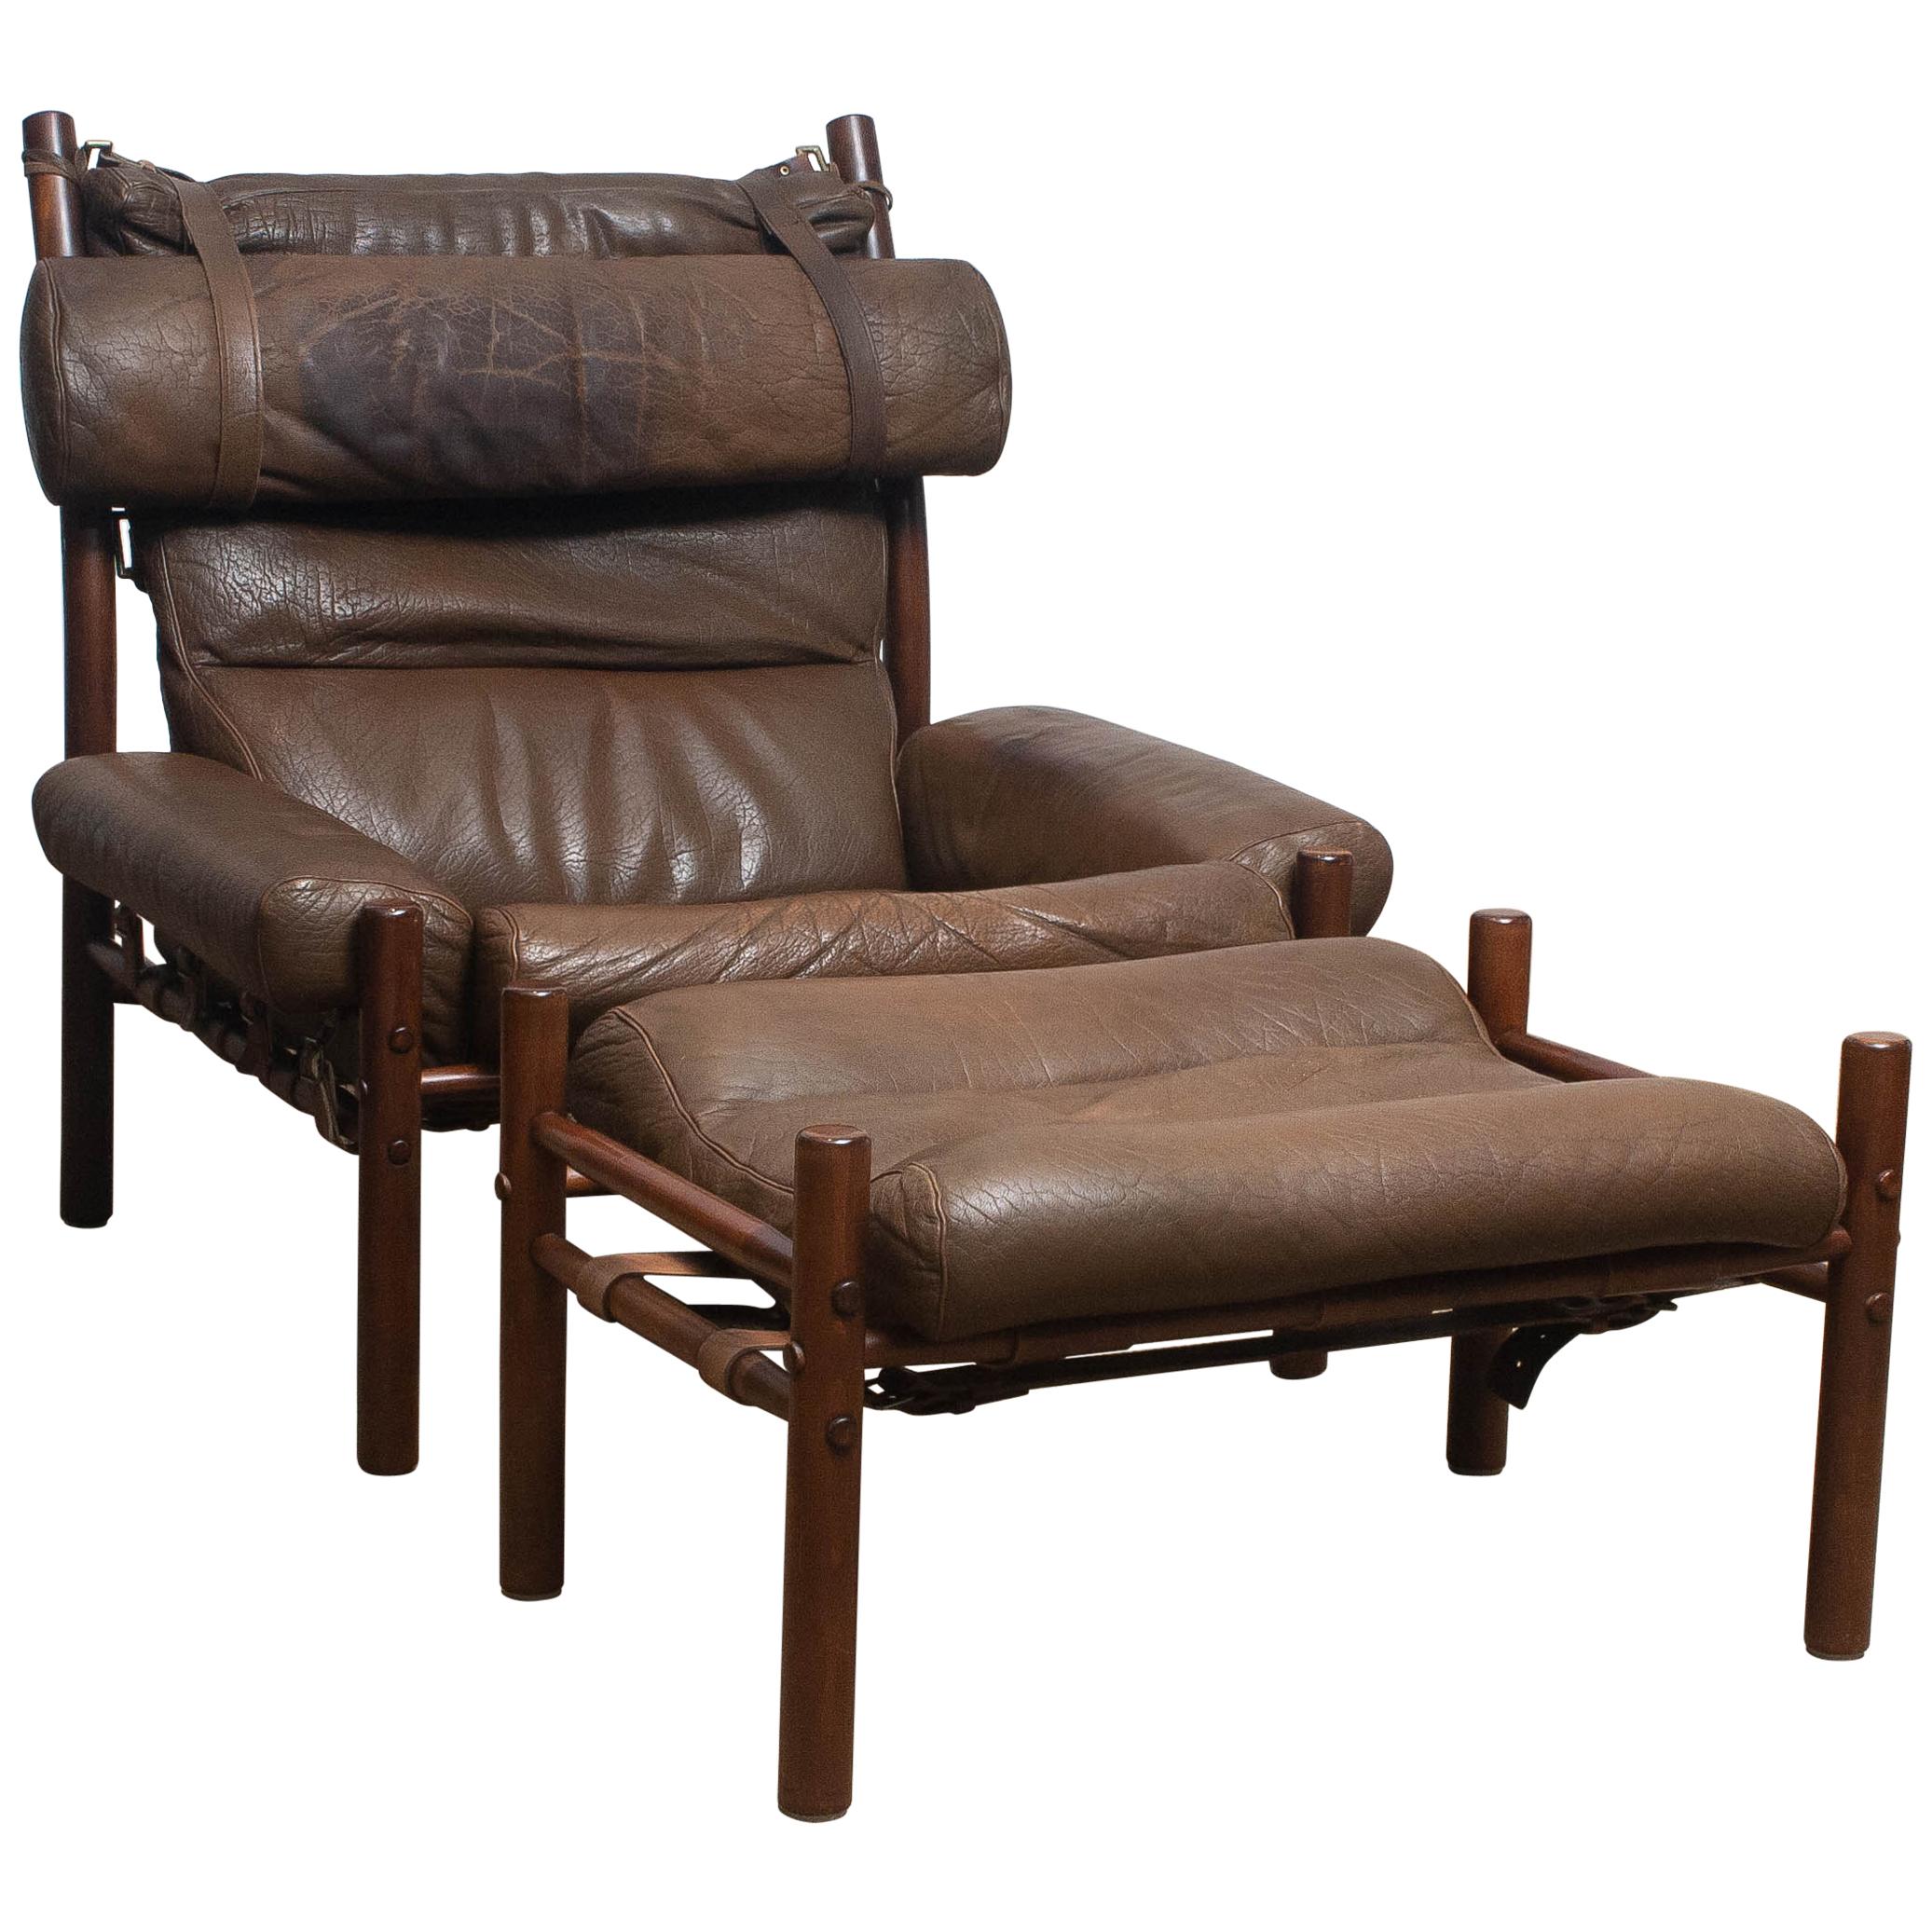 1970s Brown Buffalo Leather Chair "Inca" and Ottoman by Arne Norell Möbler AB. !